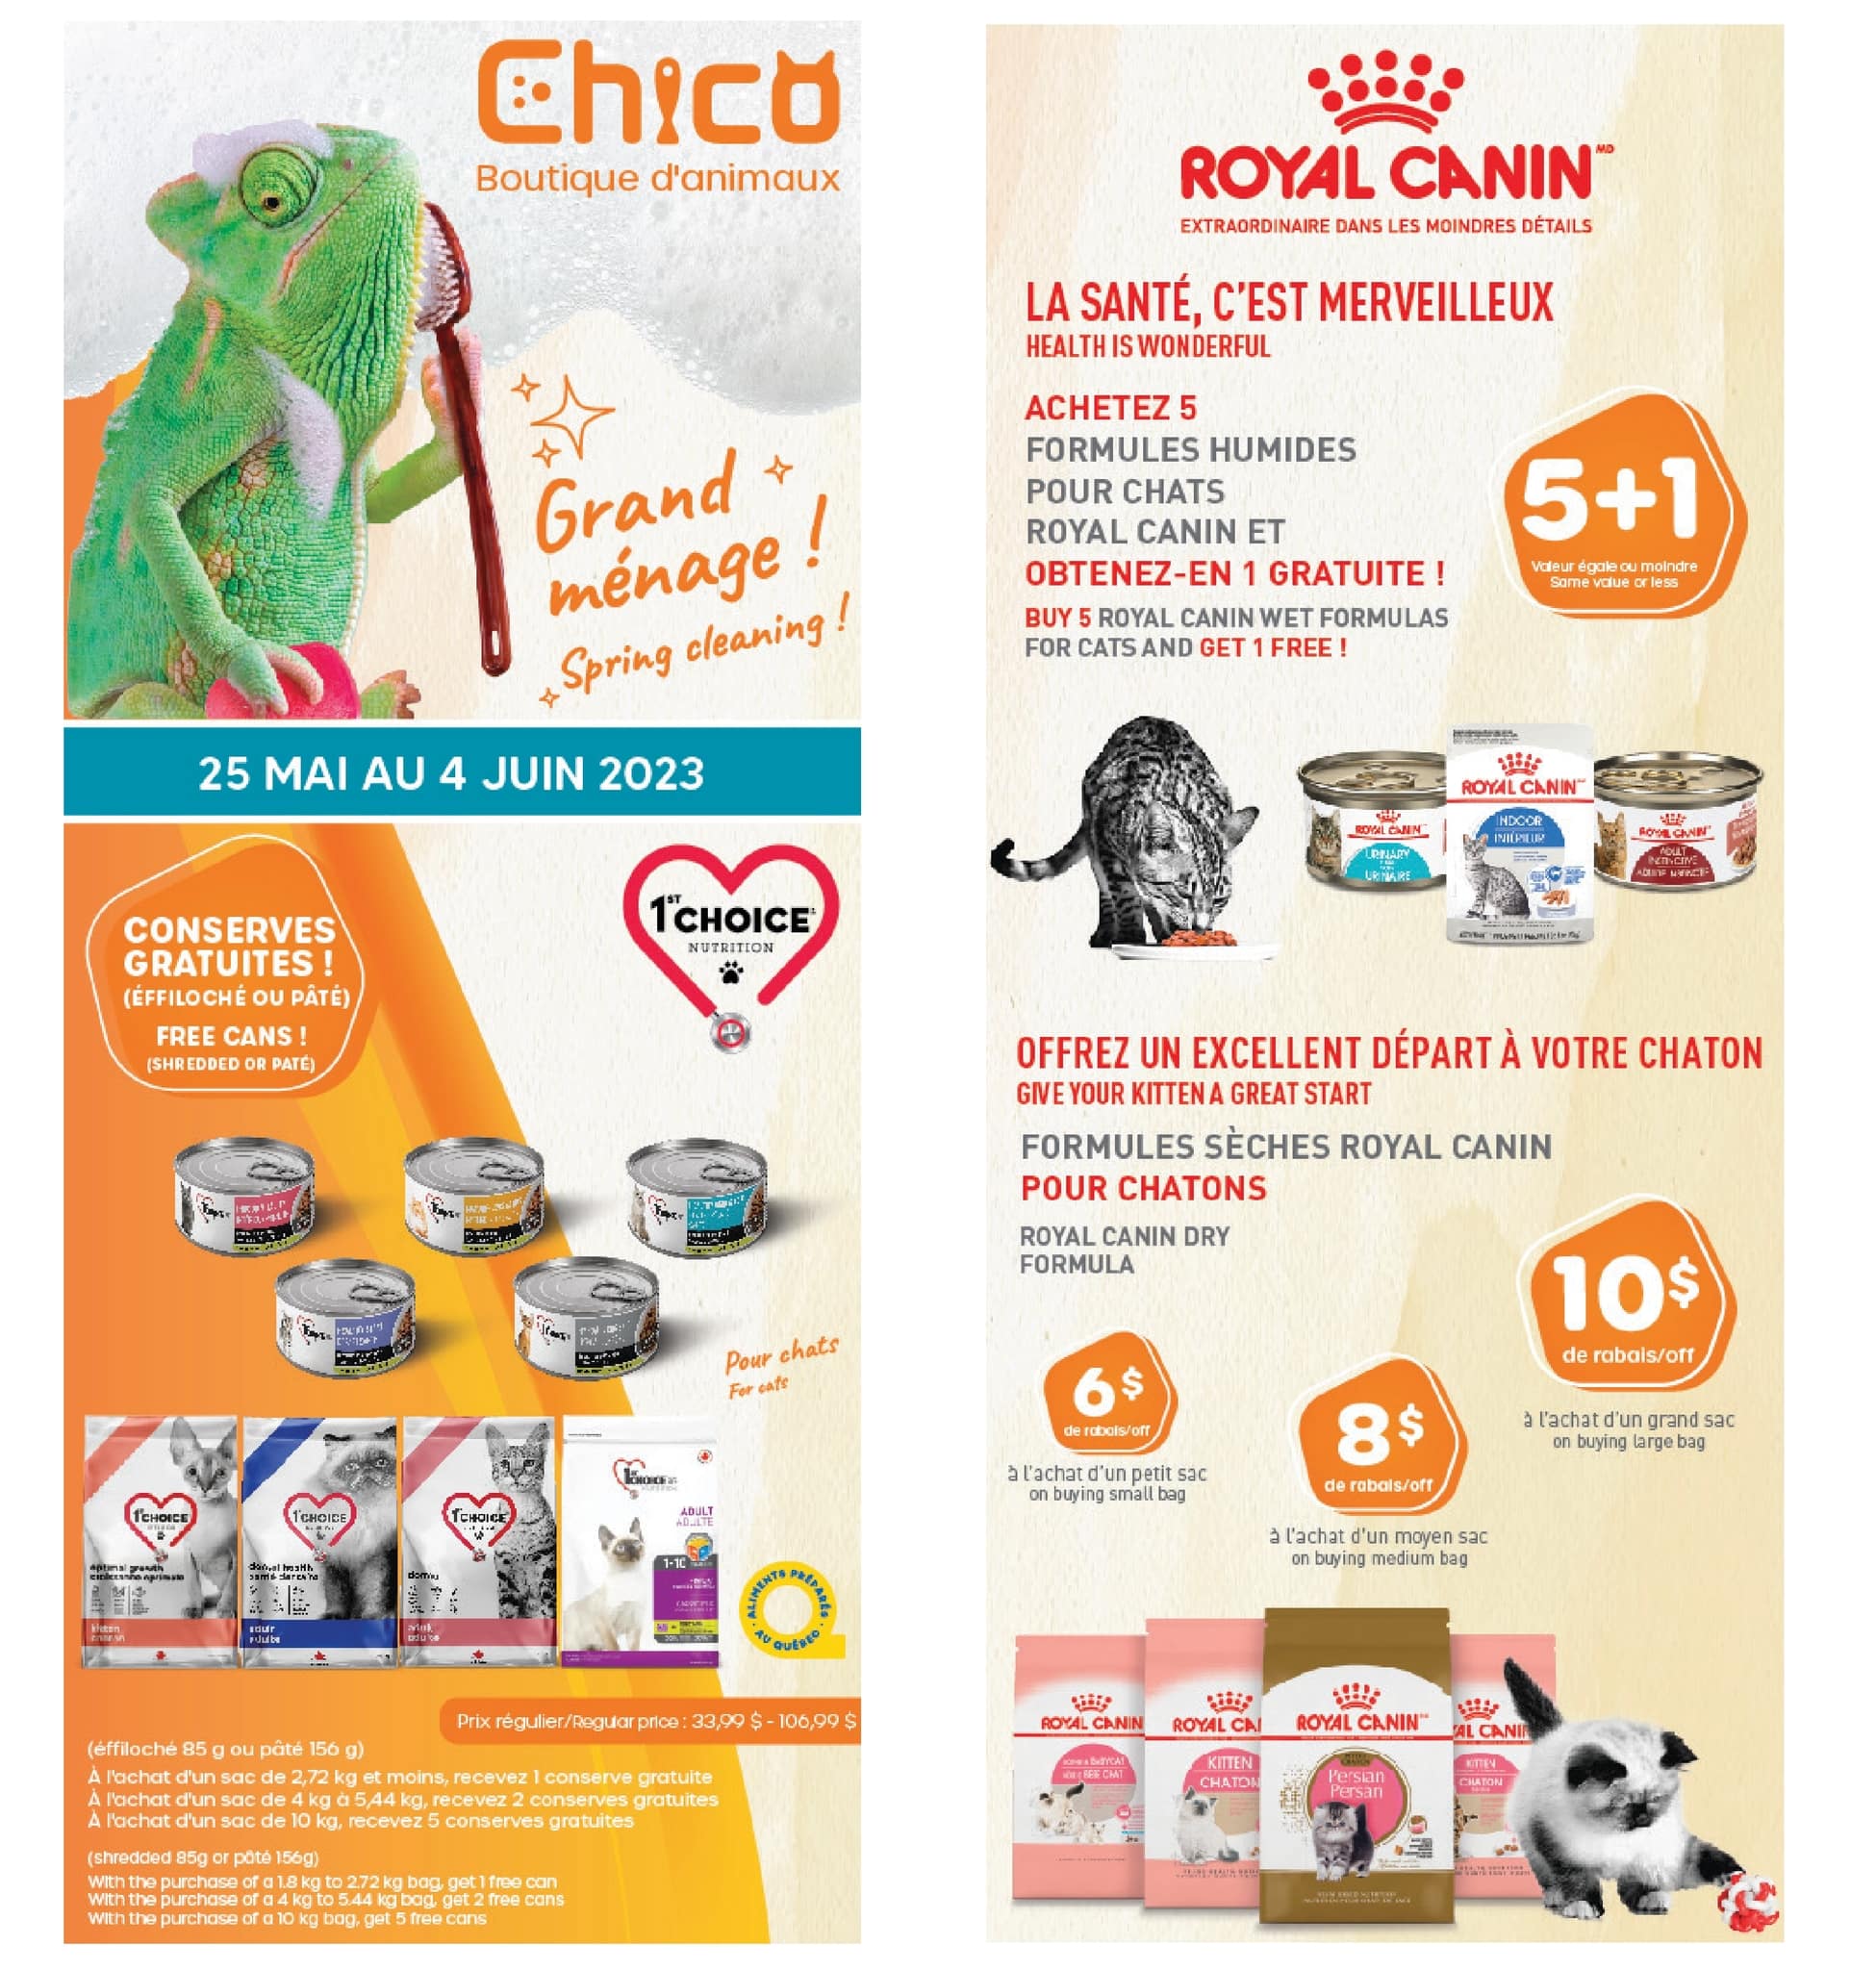 Circulaire Chico Boutique d'Animaux - Page 2